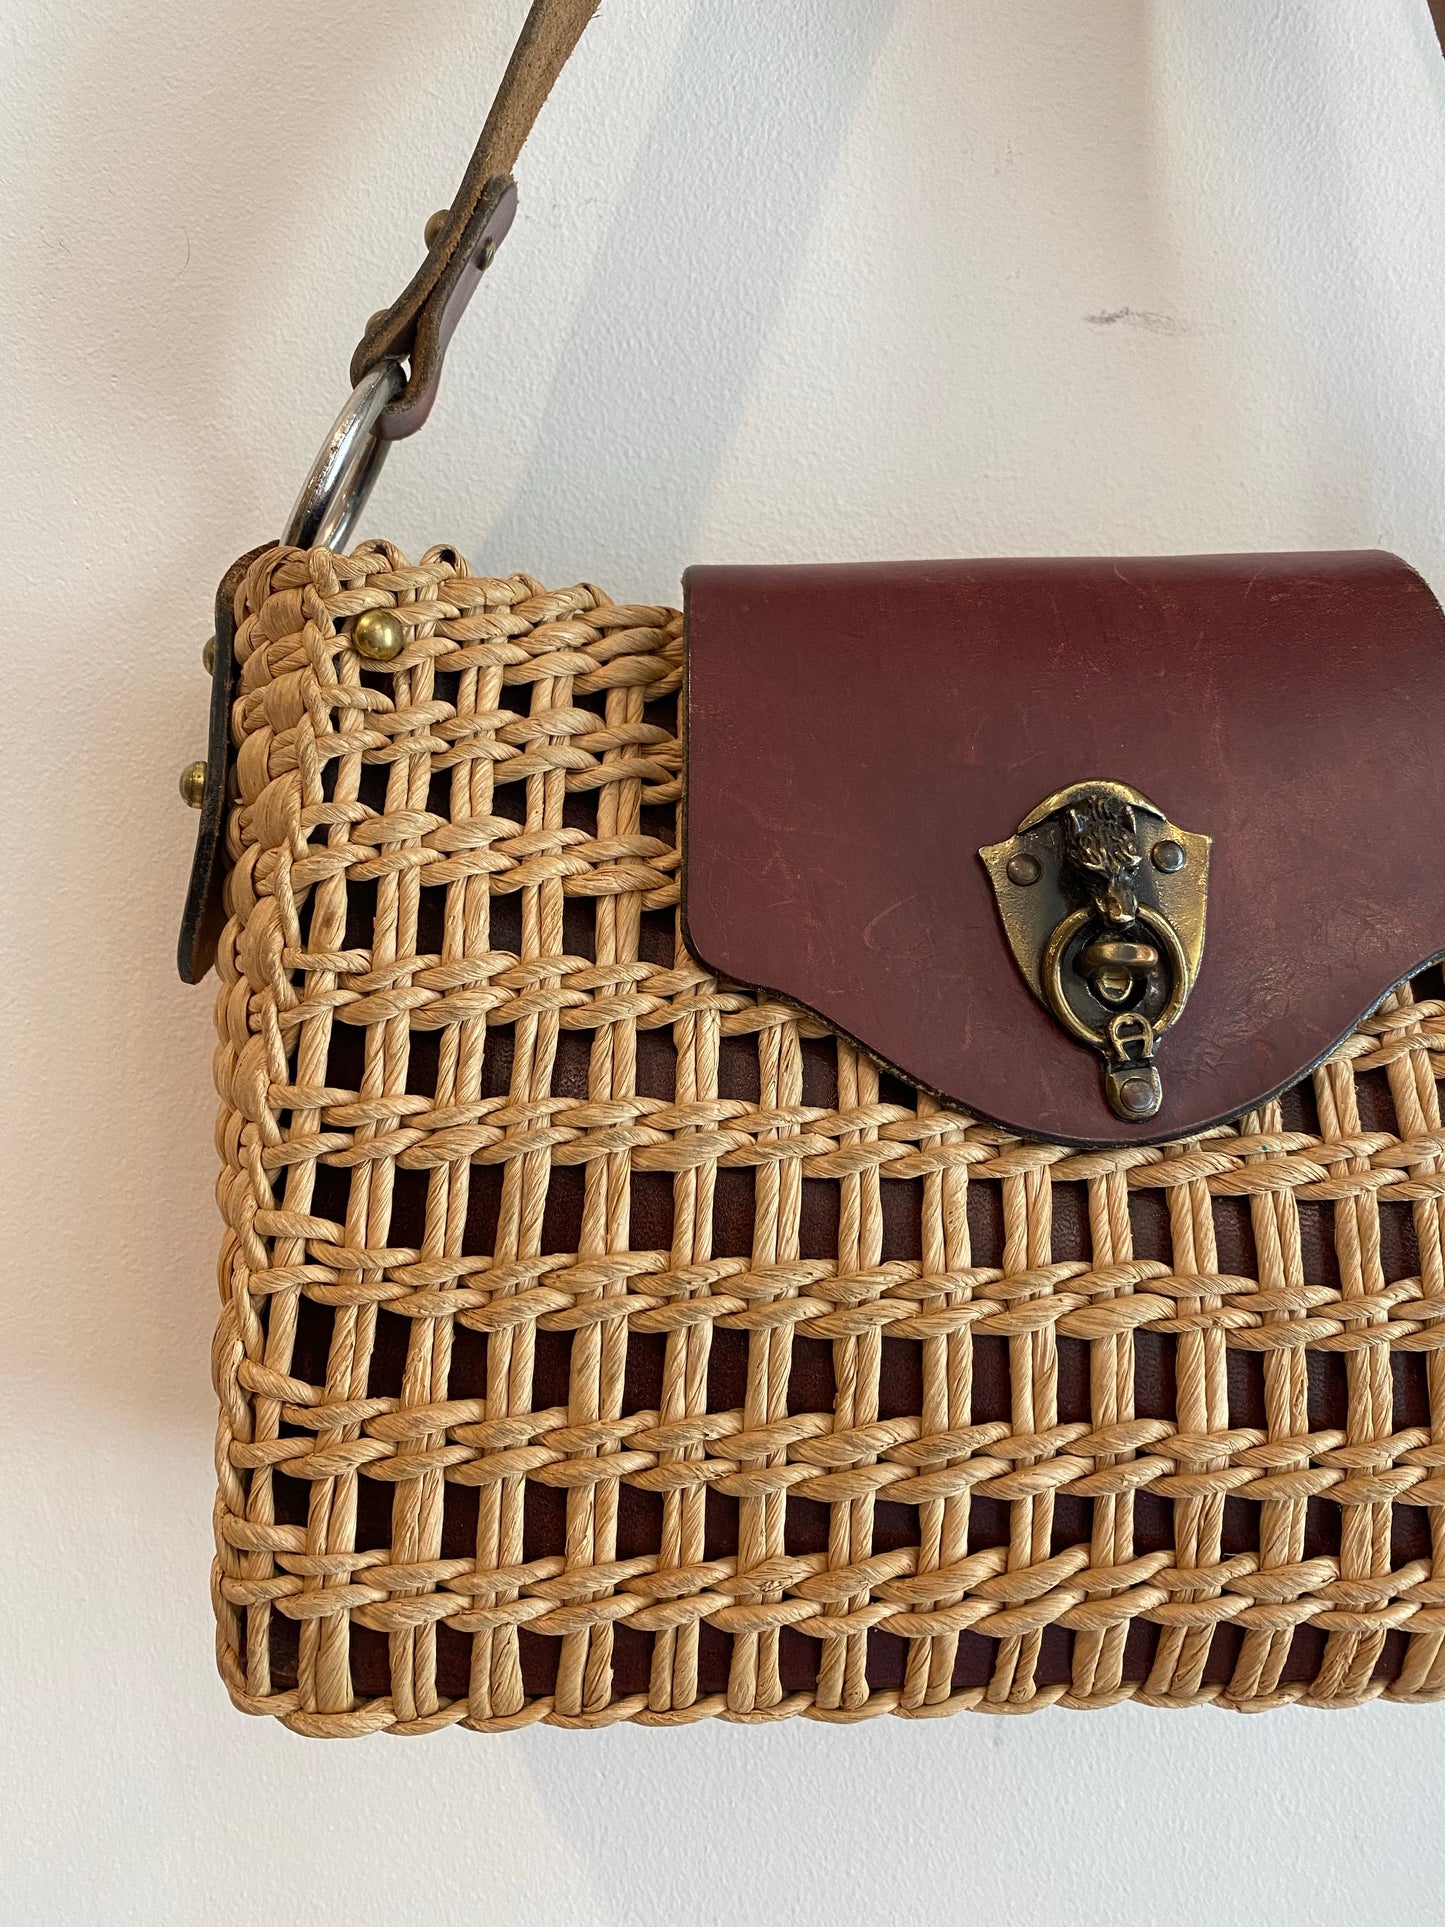 Wicker Handbag with Leather Details